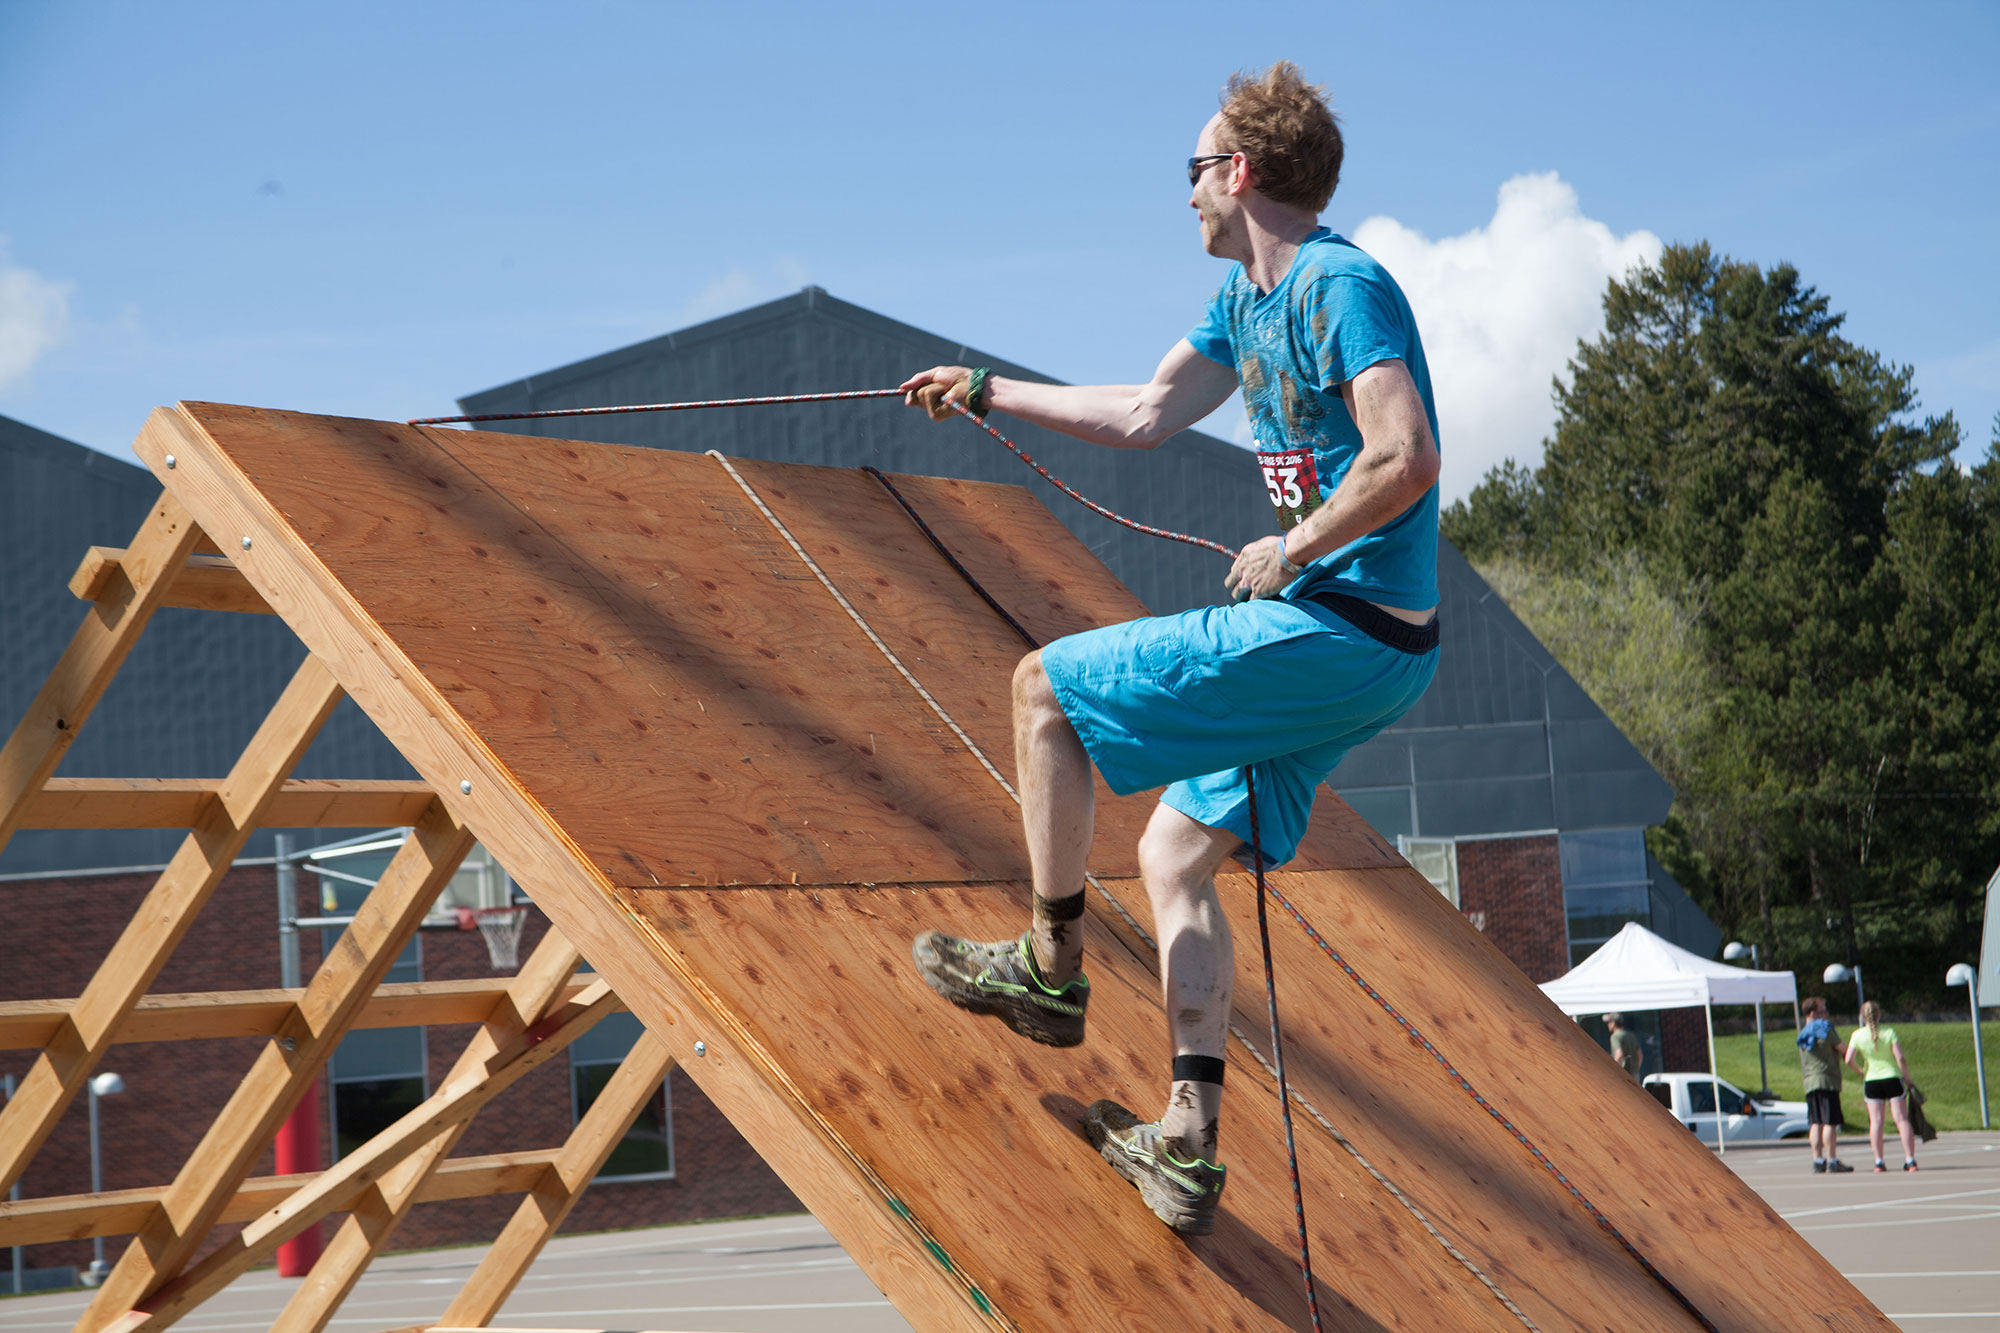 Sign up for April 15 obstacle race by April 13 | WSU Insider ...